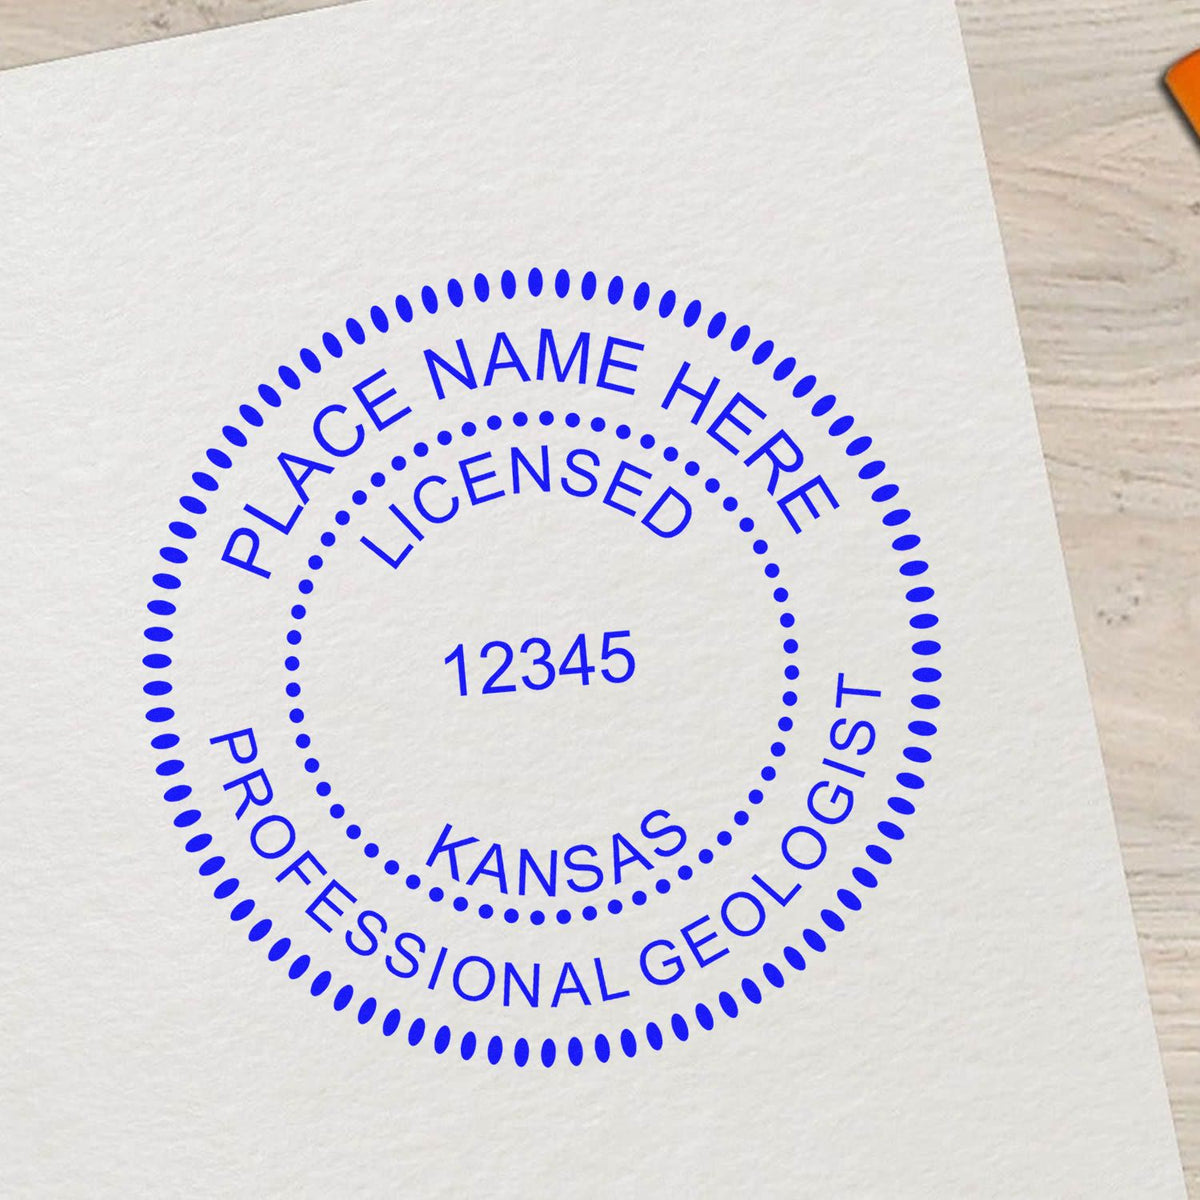 An alternative view of the Digital Kansas Geologist Stamp, Electronic Seal for Kansas Geologist stamped on a sheet of paper showing the image in use